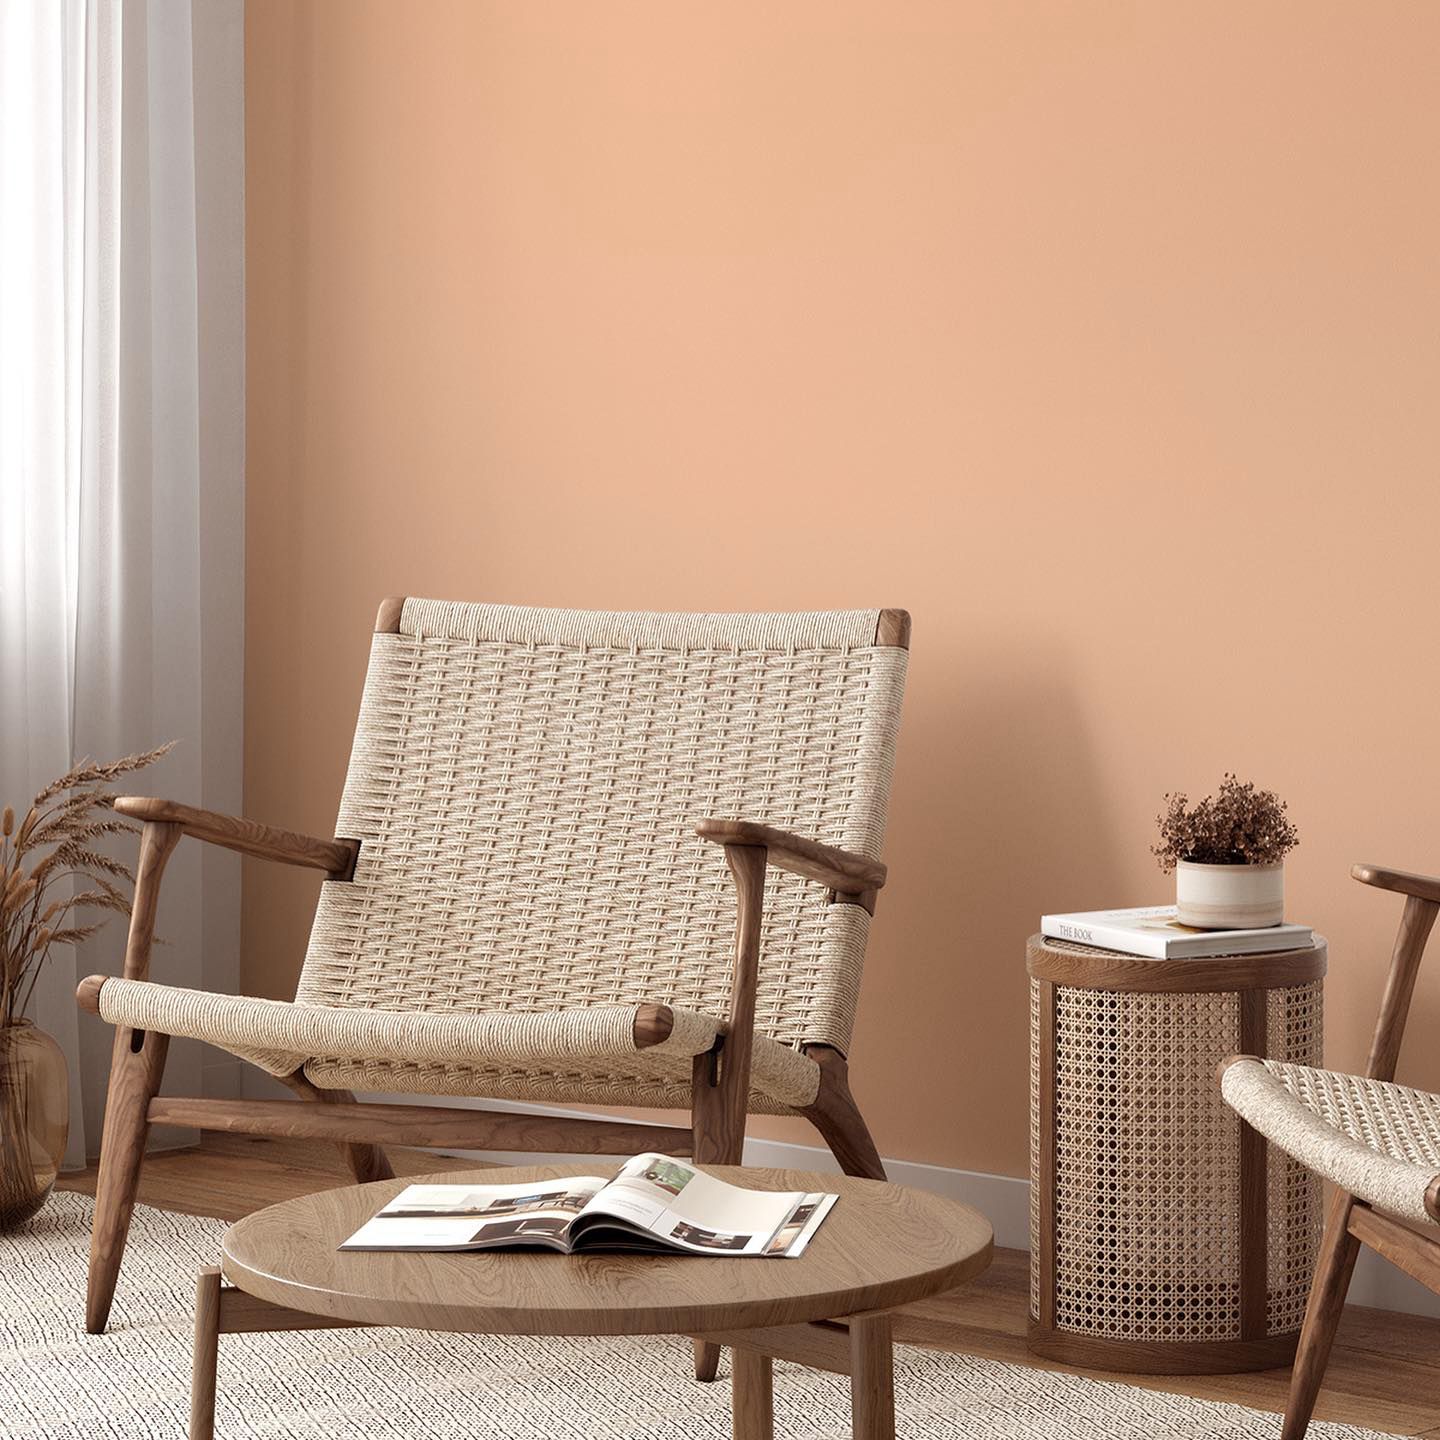 Cozy interior design with Peach Fuzz colored walls, a woven rattan armchair, and a wooden side table, showcasing Nippon Paint's Autumn Lights in a modern home